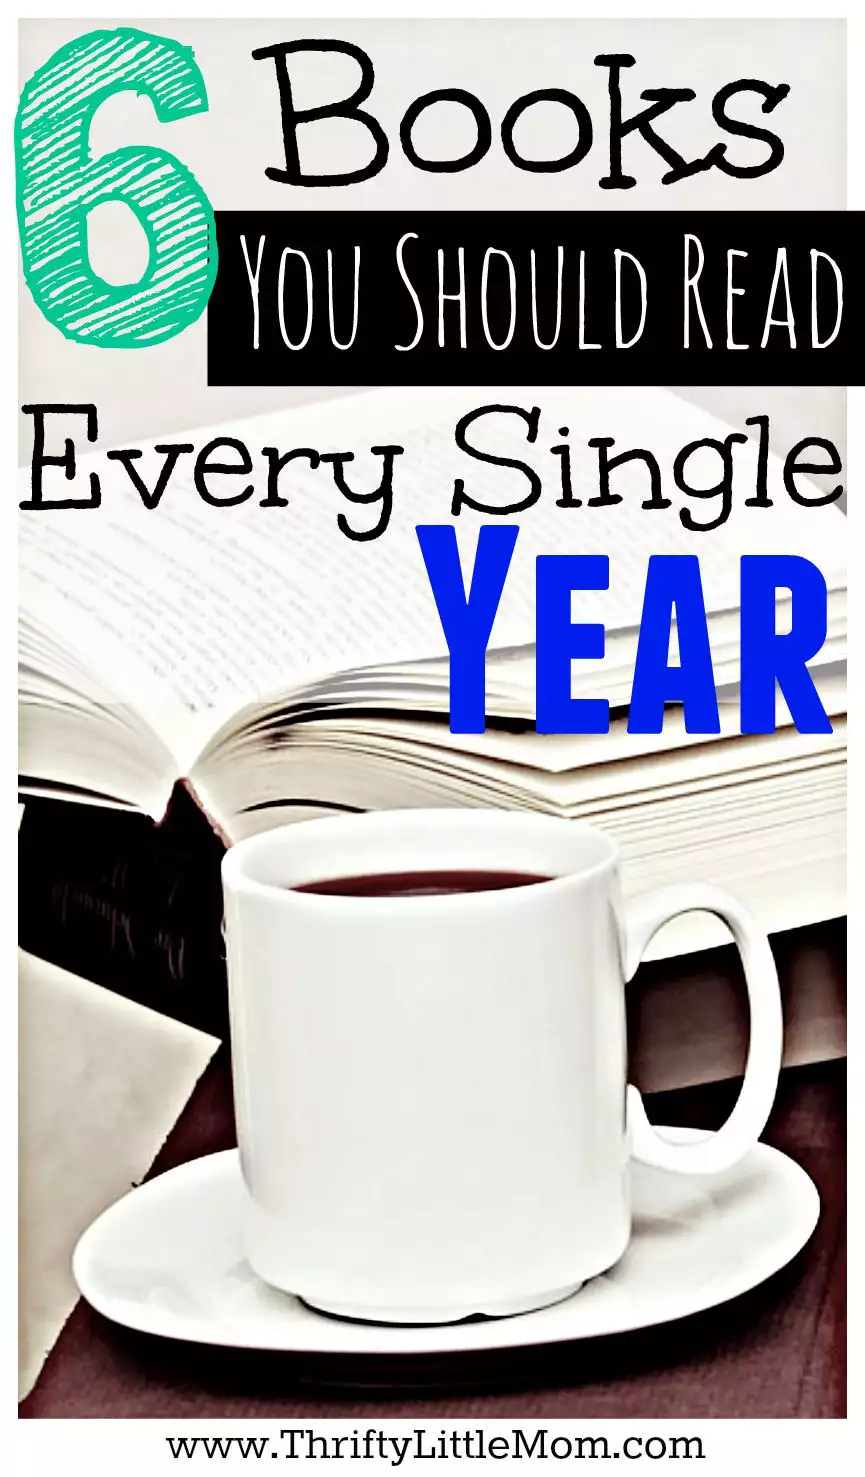 6 Books You Should Read Every Single Year. These six books are great to re-read each and every year to motivate and inspire you toward your goals financial and organization goals.